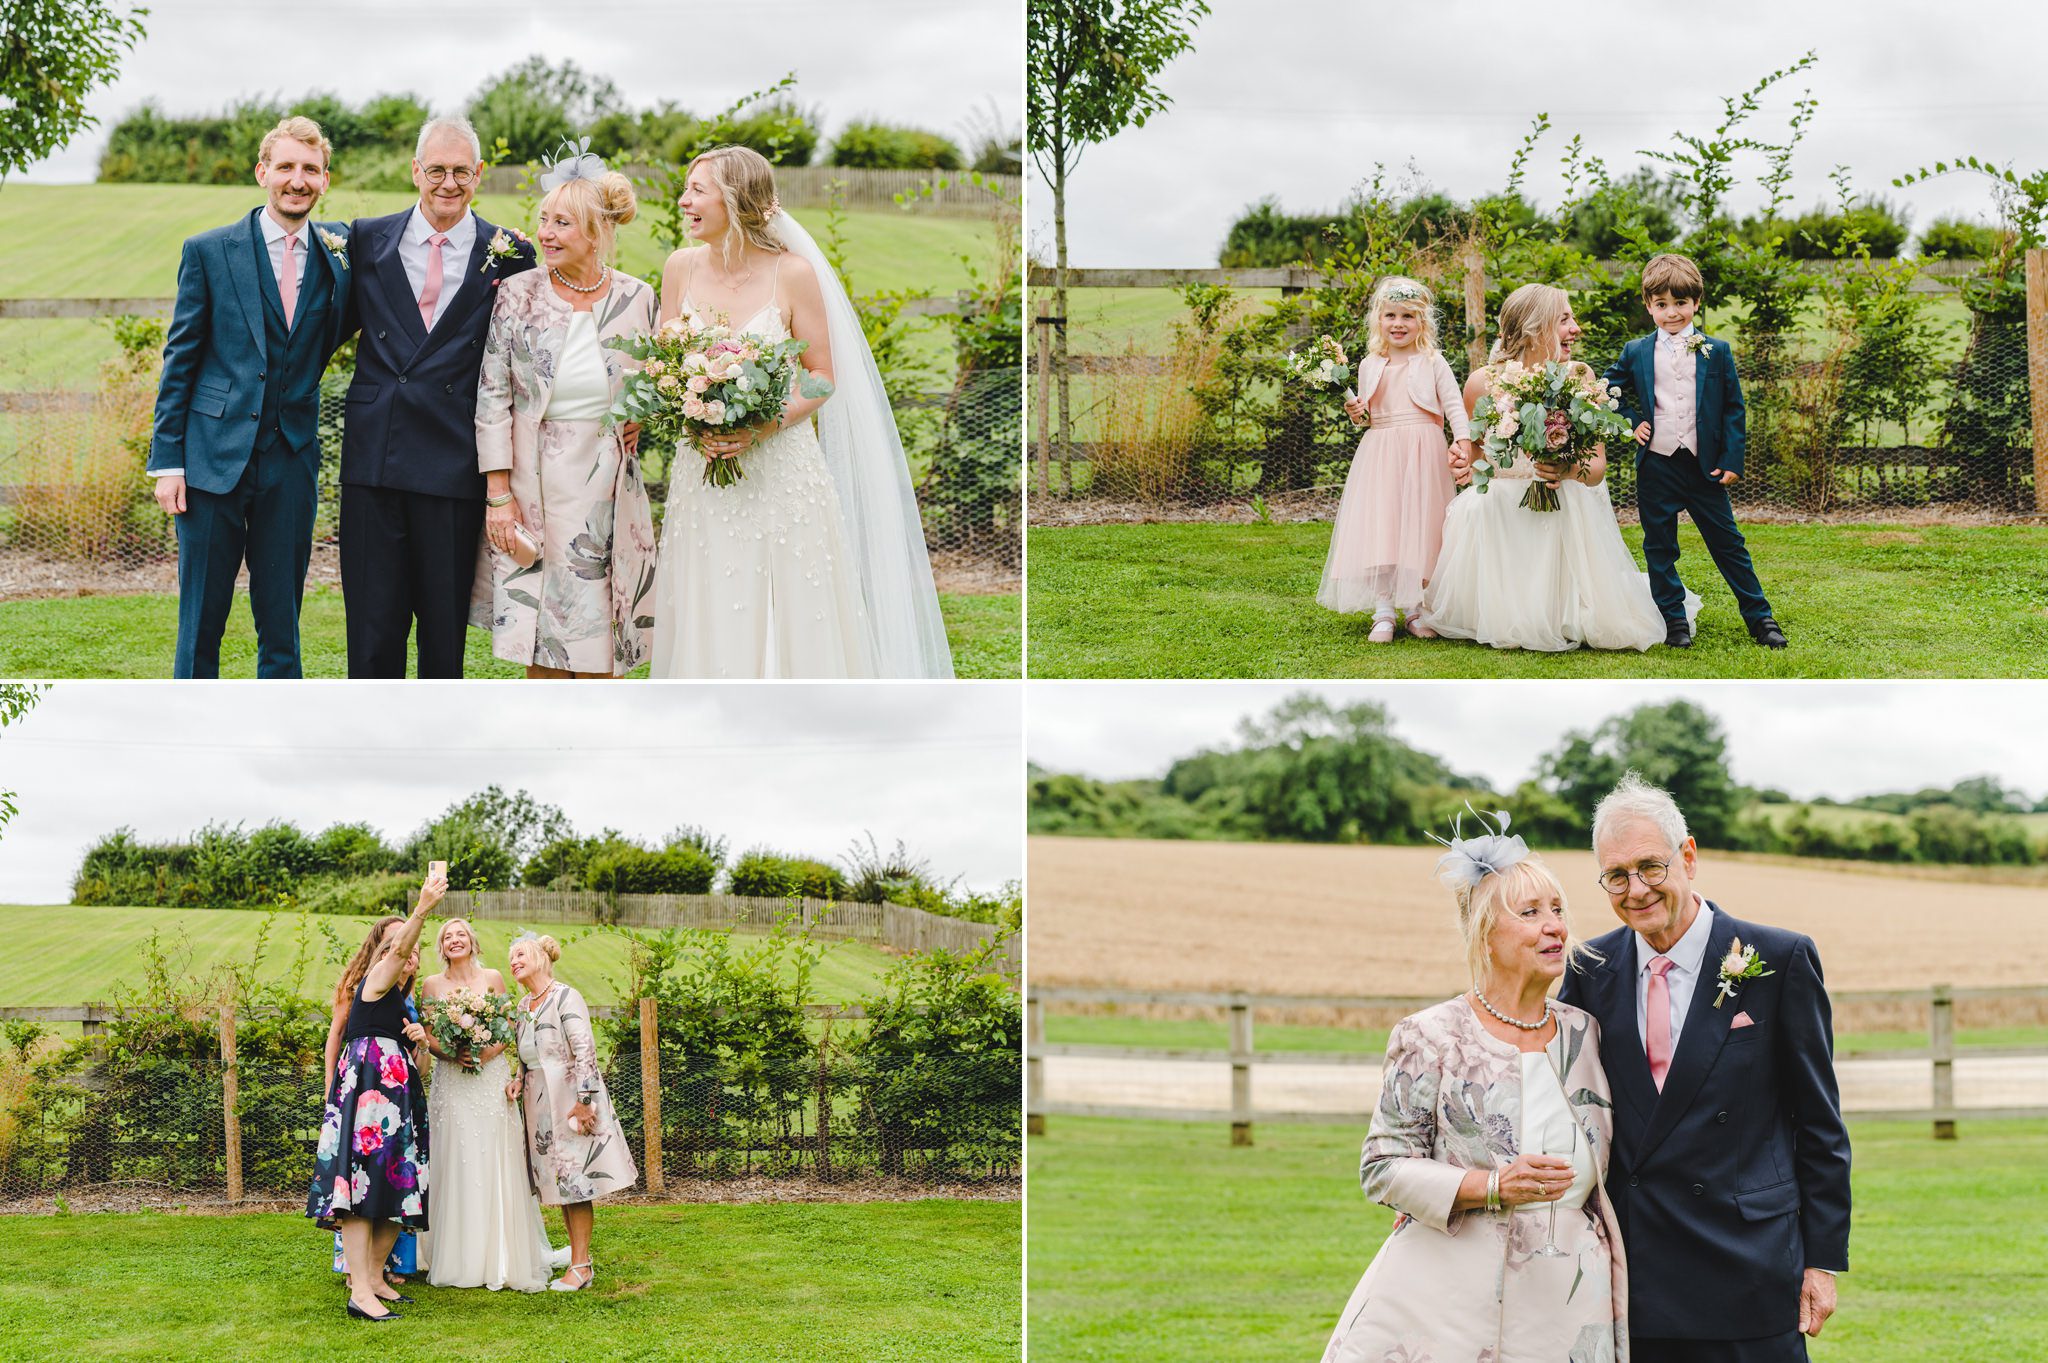 Group pictures at an Upcote Barn wedding